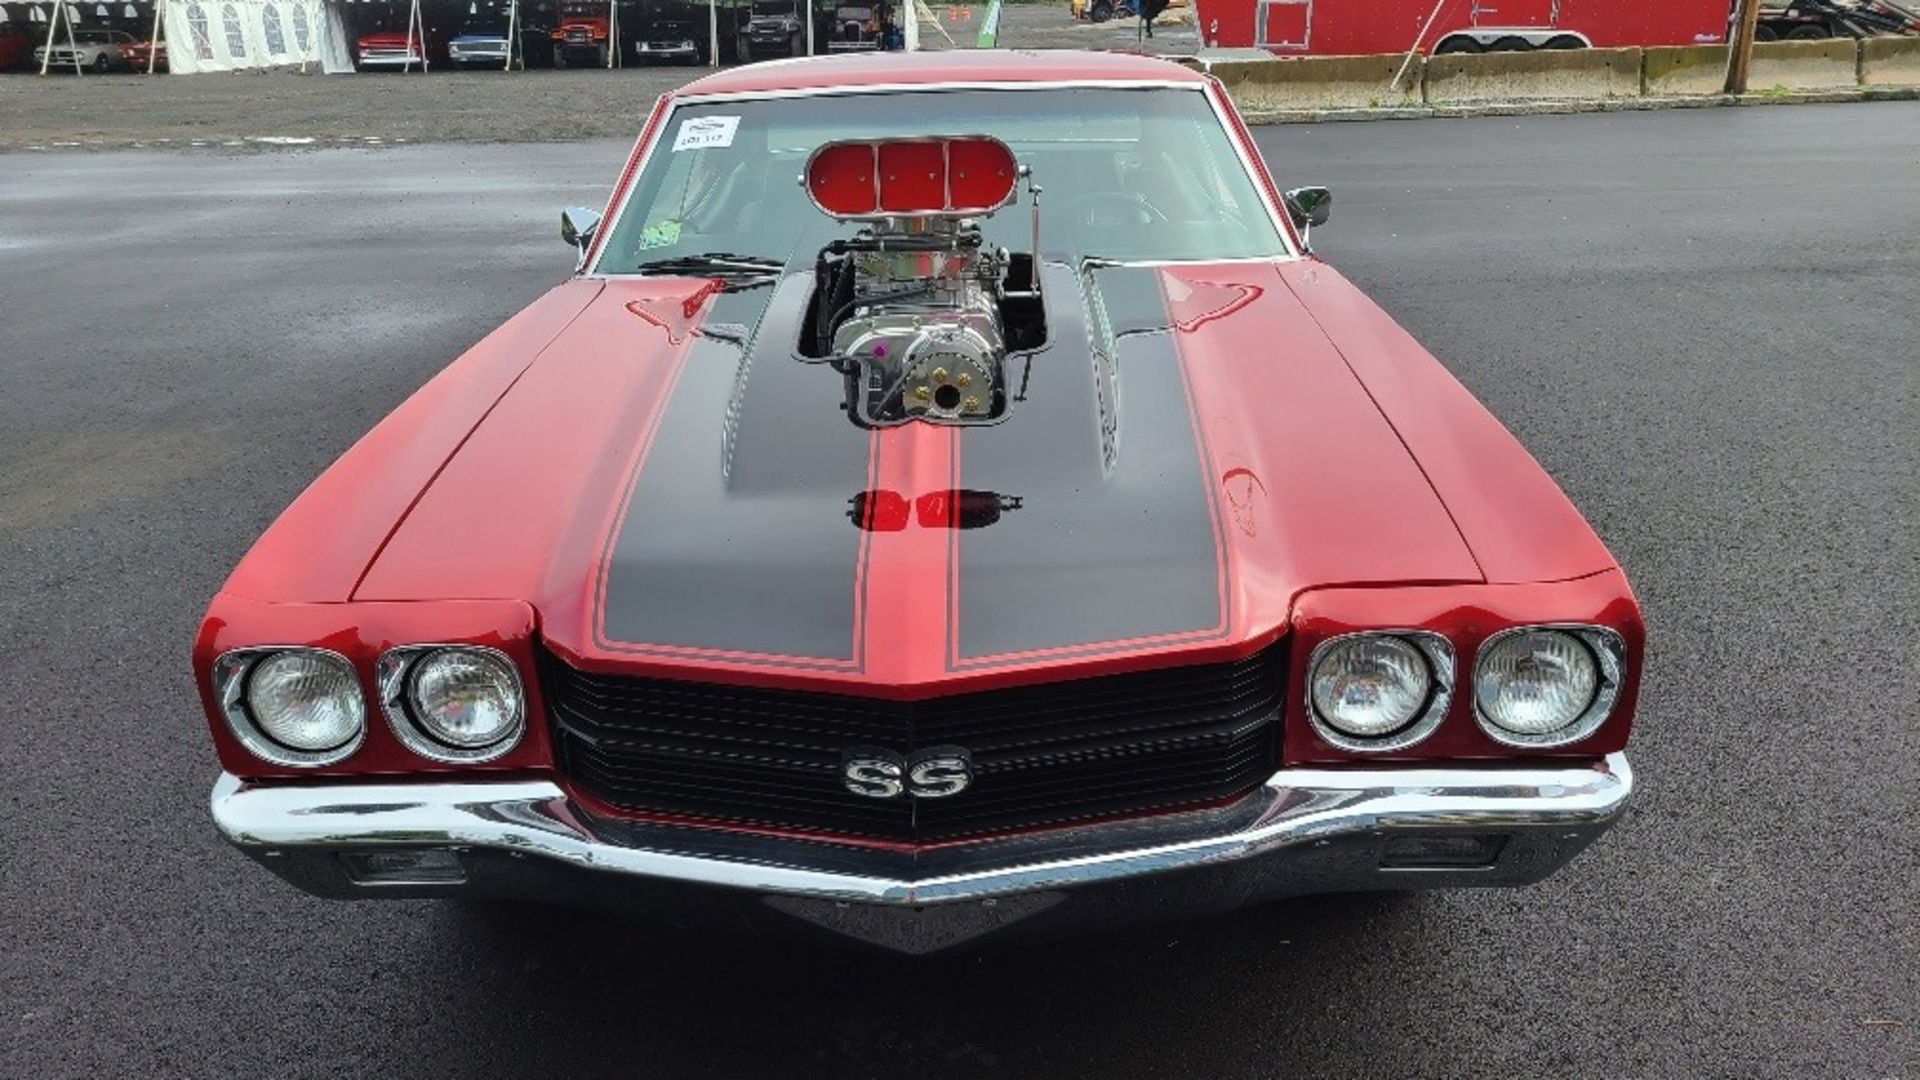 1970 Chevelle Ss - Image 13 of 18